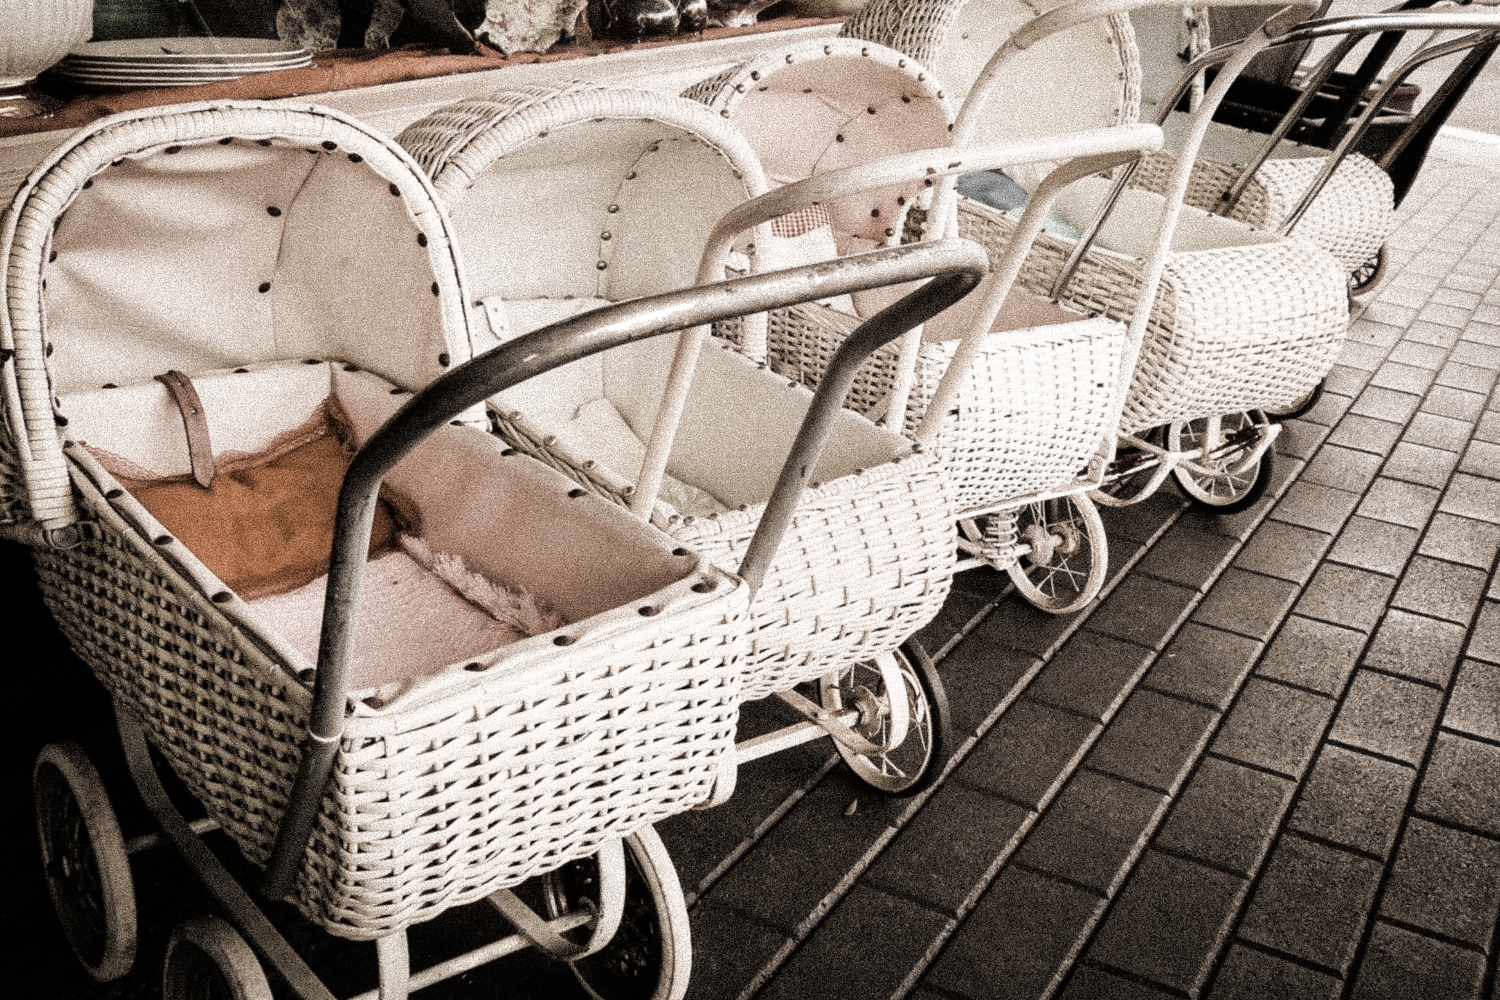 Photo shows row of white, empty baby carriages